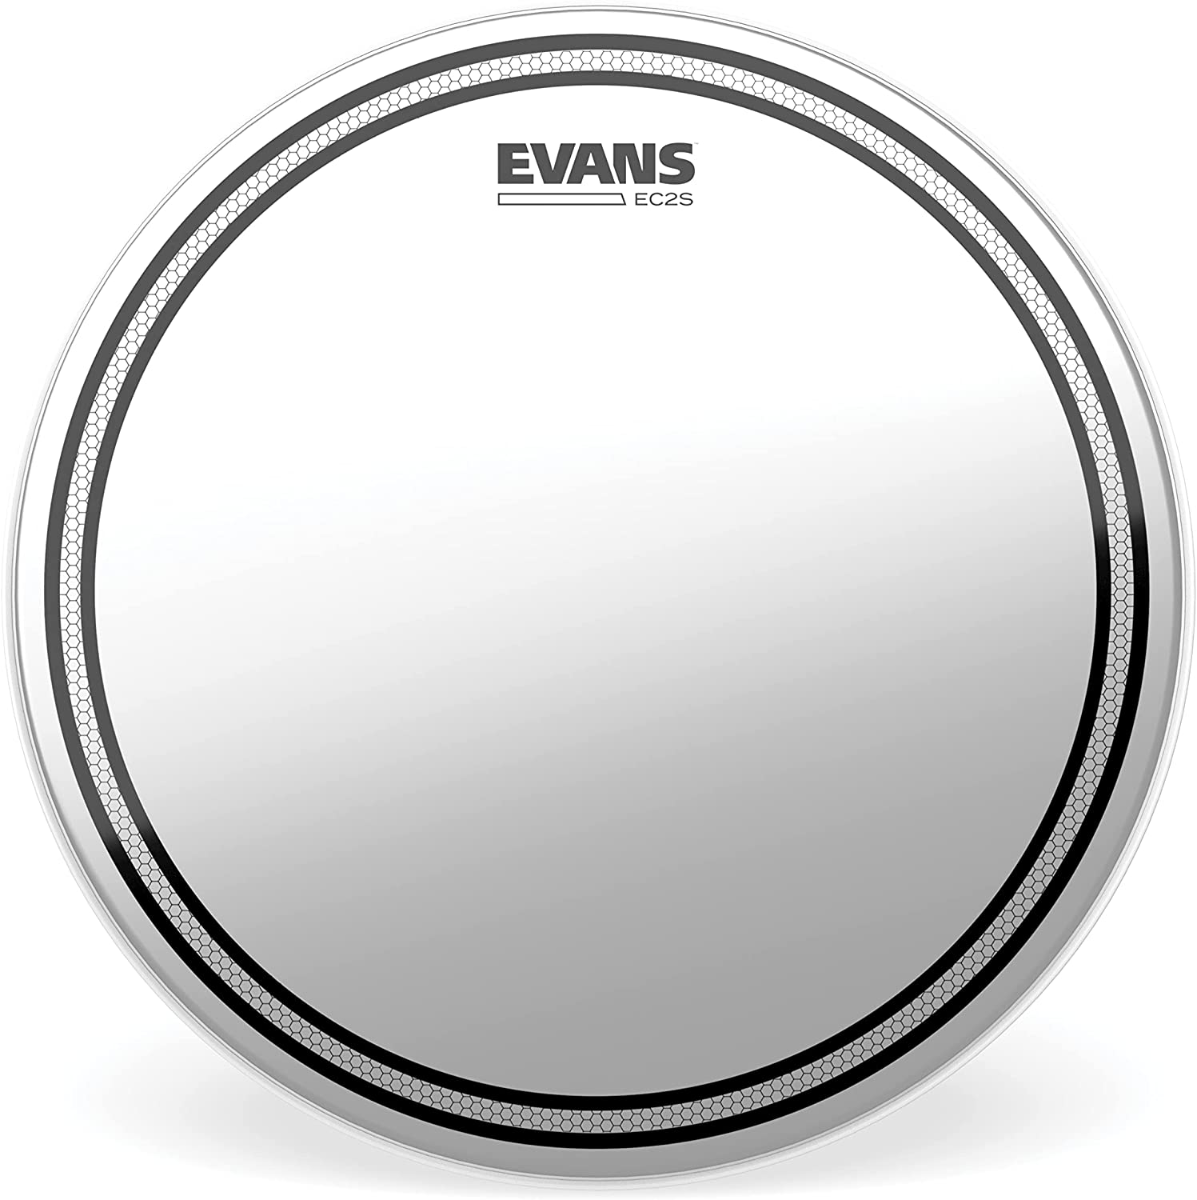 Evans EC2S Frosted SST Drumhead - 14"